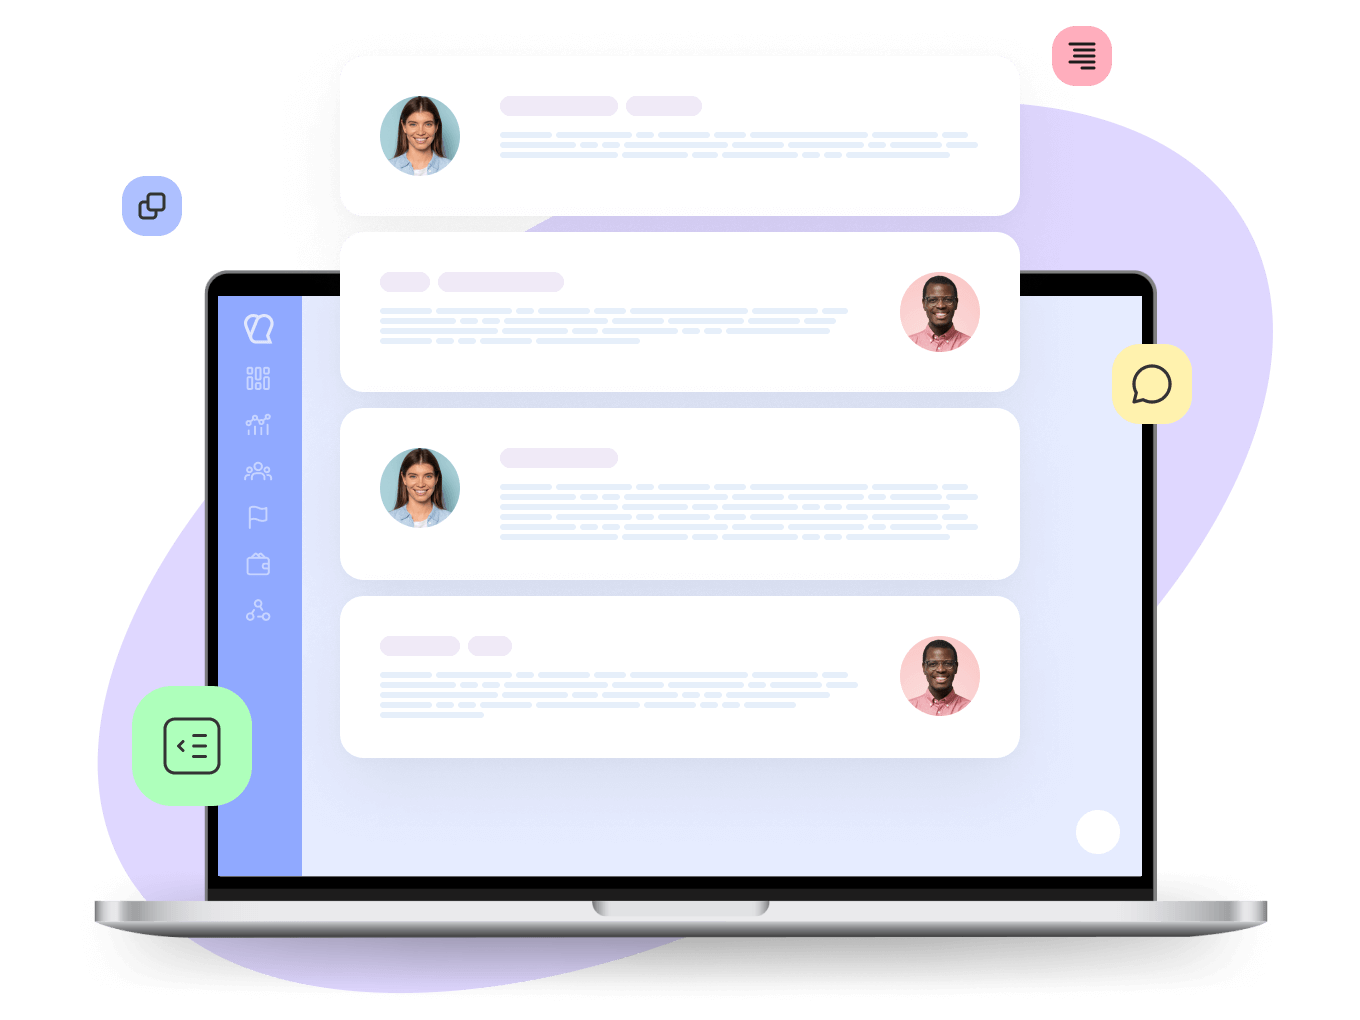 Elevate affiliate communication with the in-platform messenger